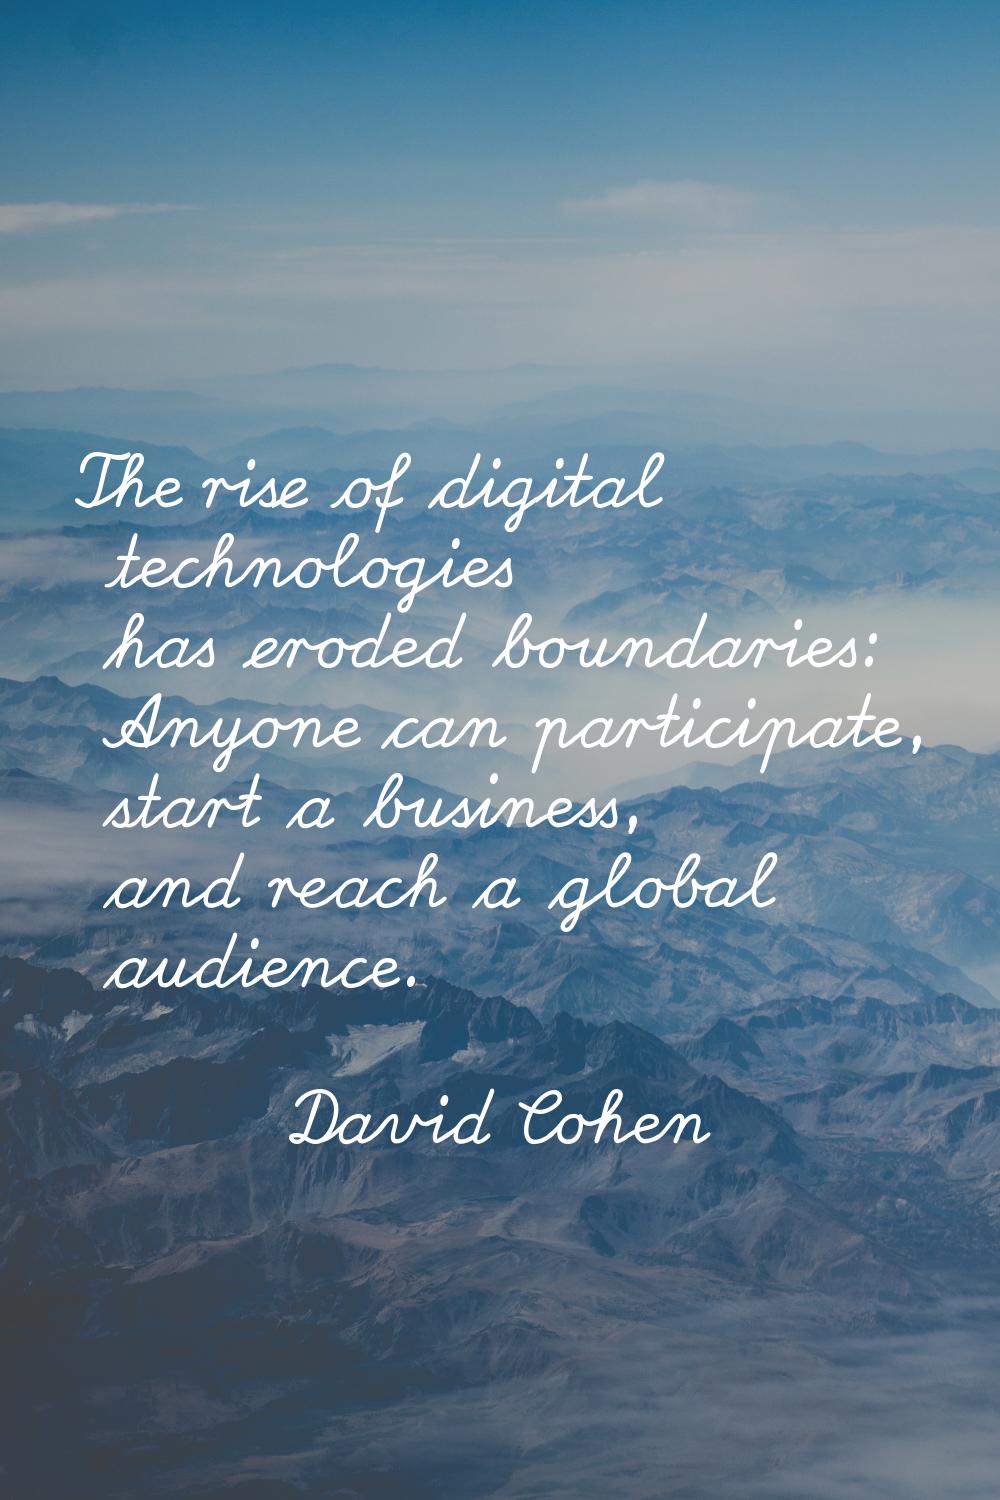 The rise of digital technologies has eroded boundaries: Anyone can participate, start a business, a